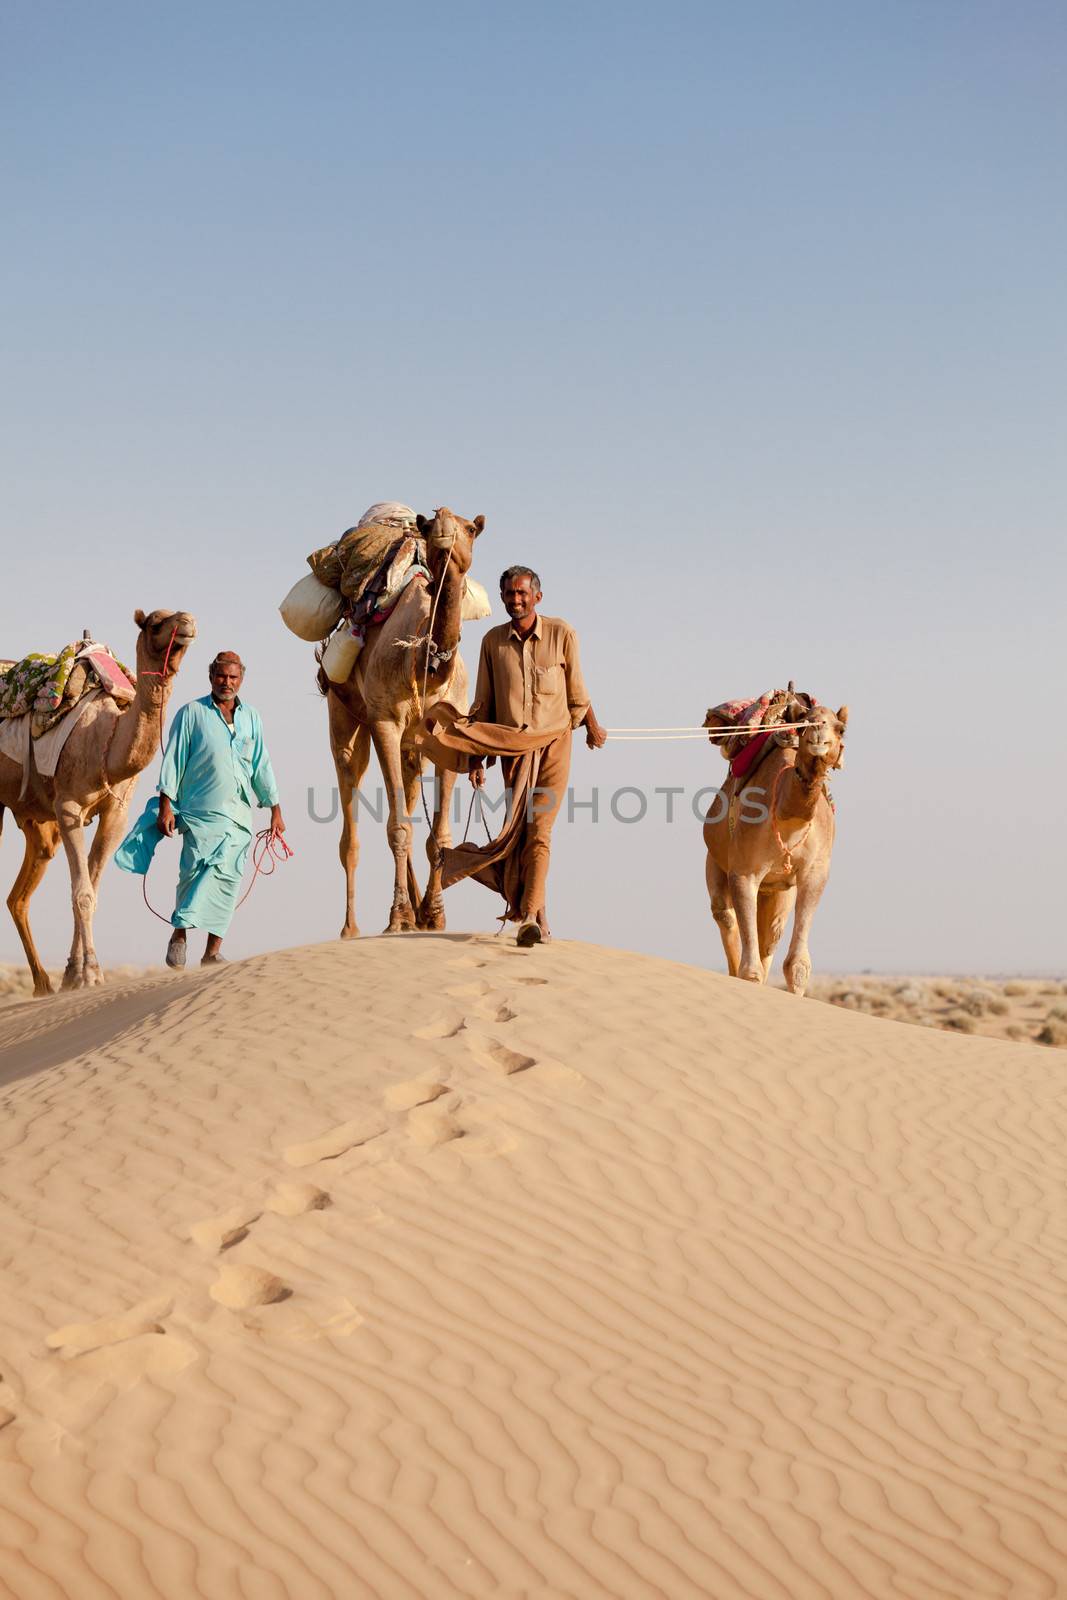 Caravan with bedouins and camels in desert by iryna_rasko